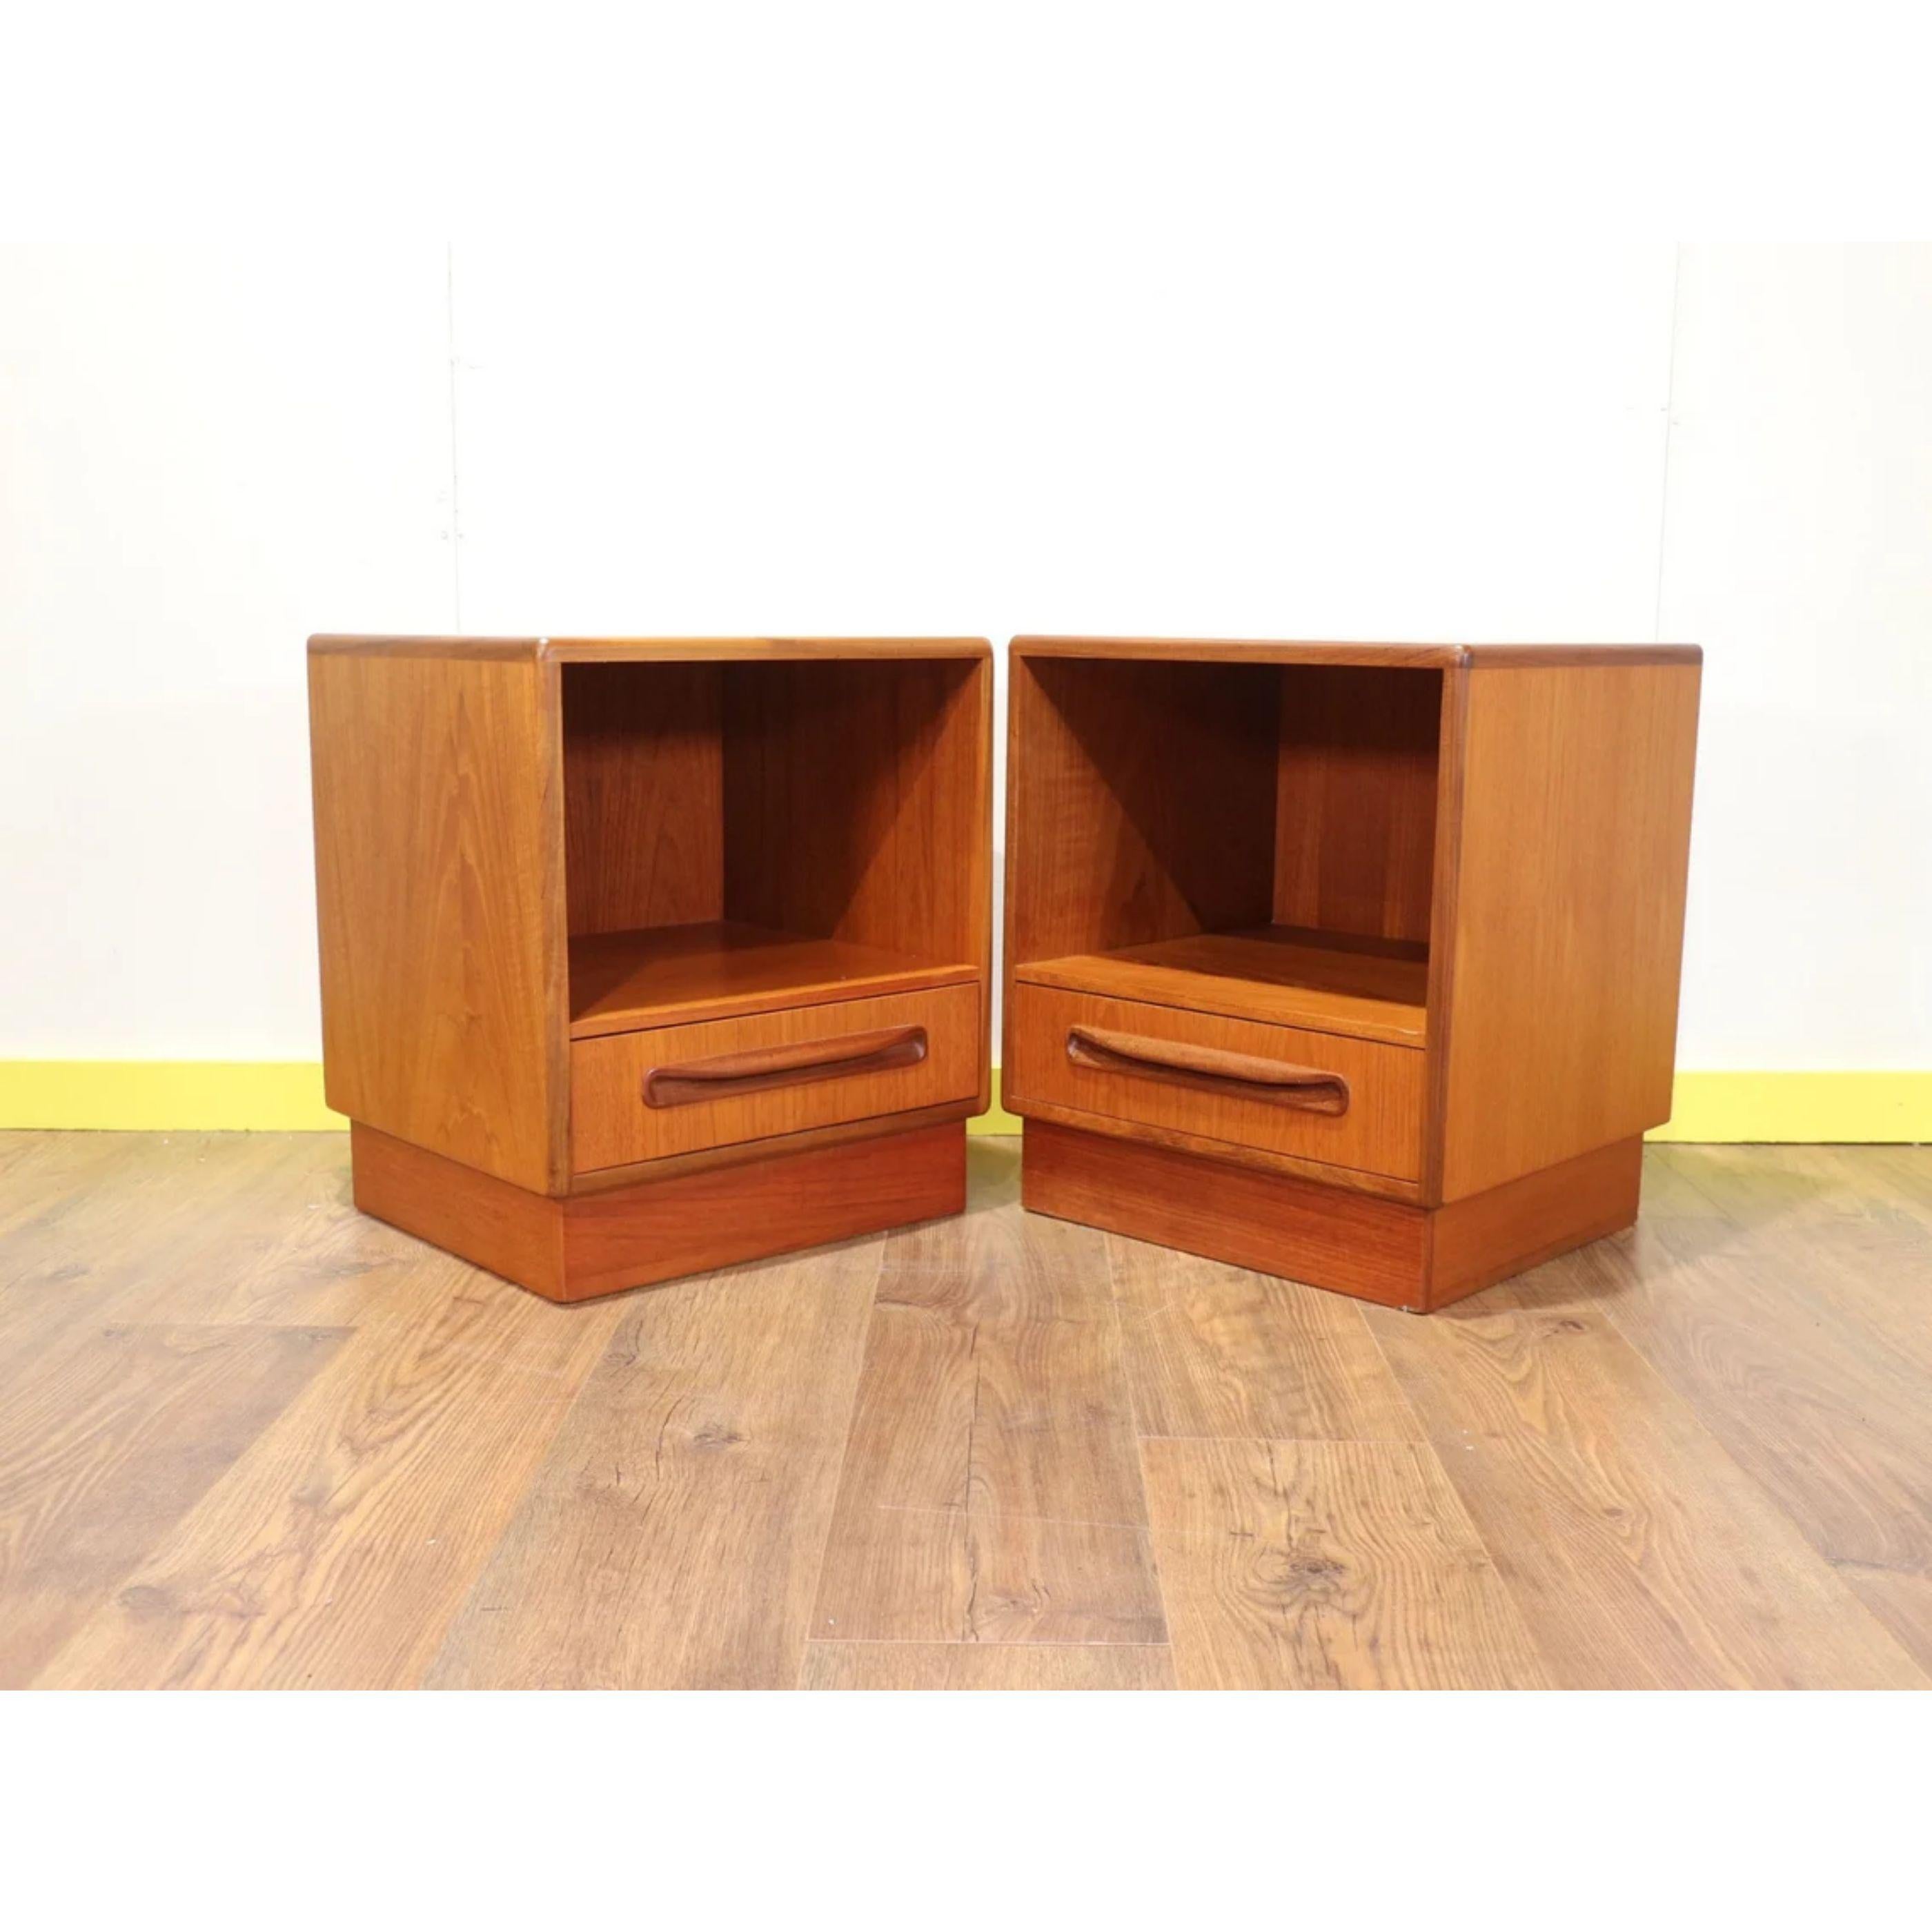 These delightful nightstand chests are designed by Victor Wilkins and produced by British furniture manufacturing company G-Plan in the mid-twentieth century. G Plan - E. Gomme Ltd were based in High Wycombe, England, a major centre of British